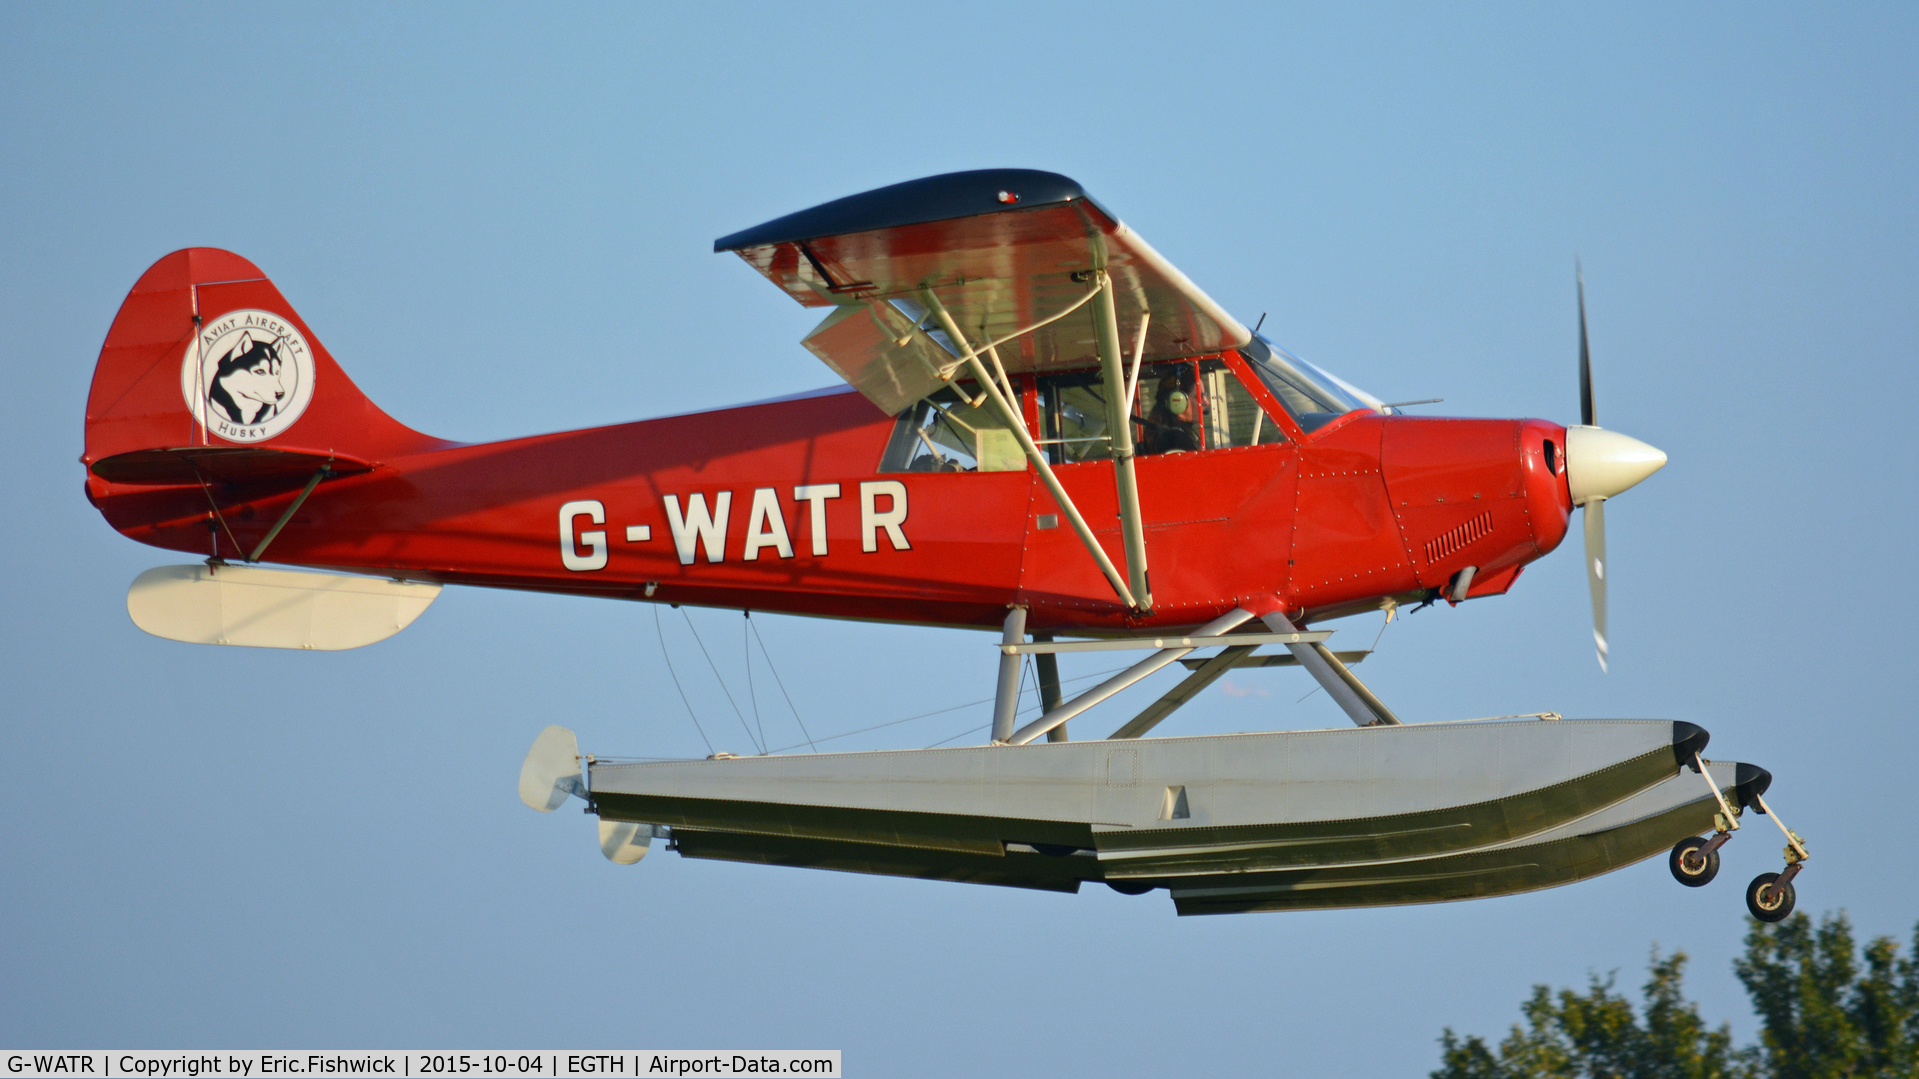 G-WATR, 1988 Christen A-1 Husky C/N 1040, 42. G-WATR at The Shuttleworth 'Uncovered' Airshow (Finale,) Oct. 2015.